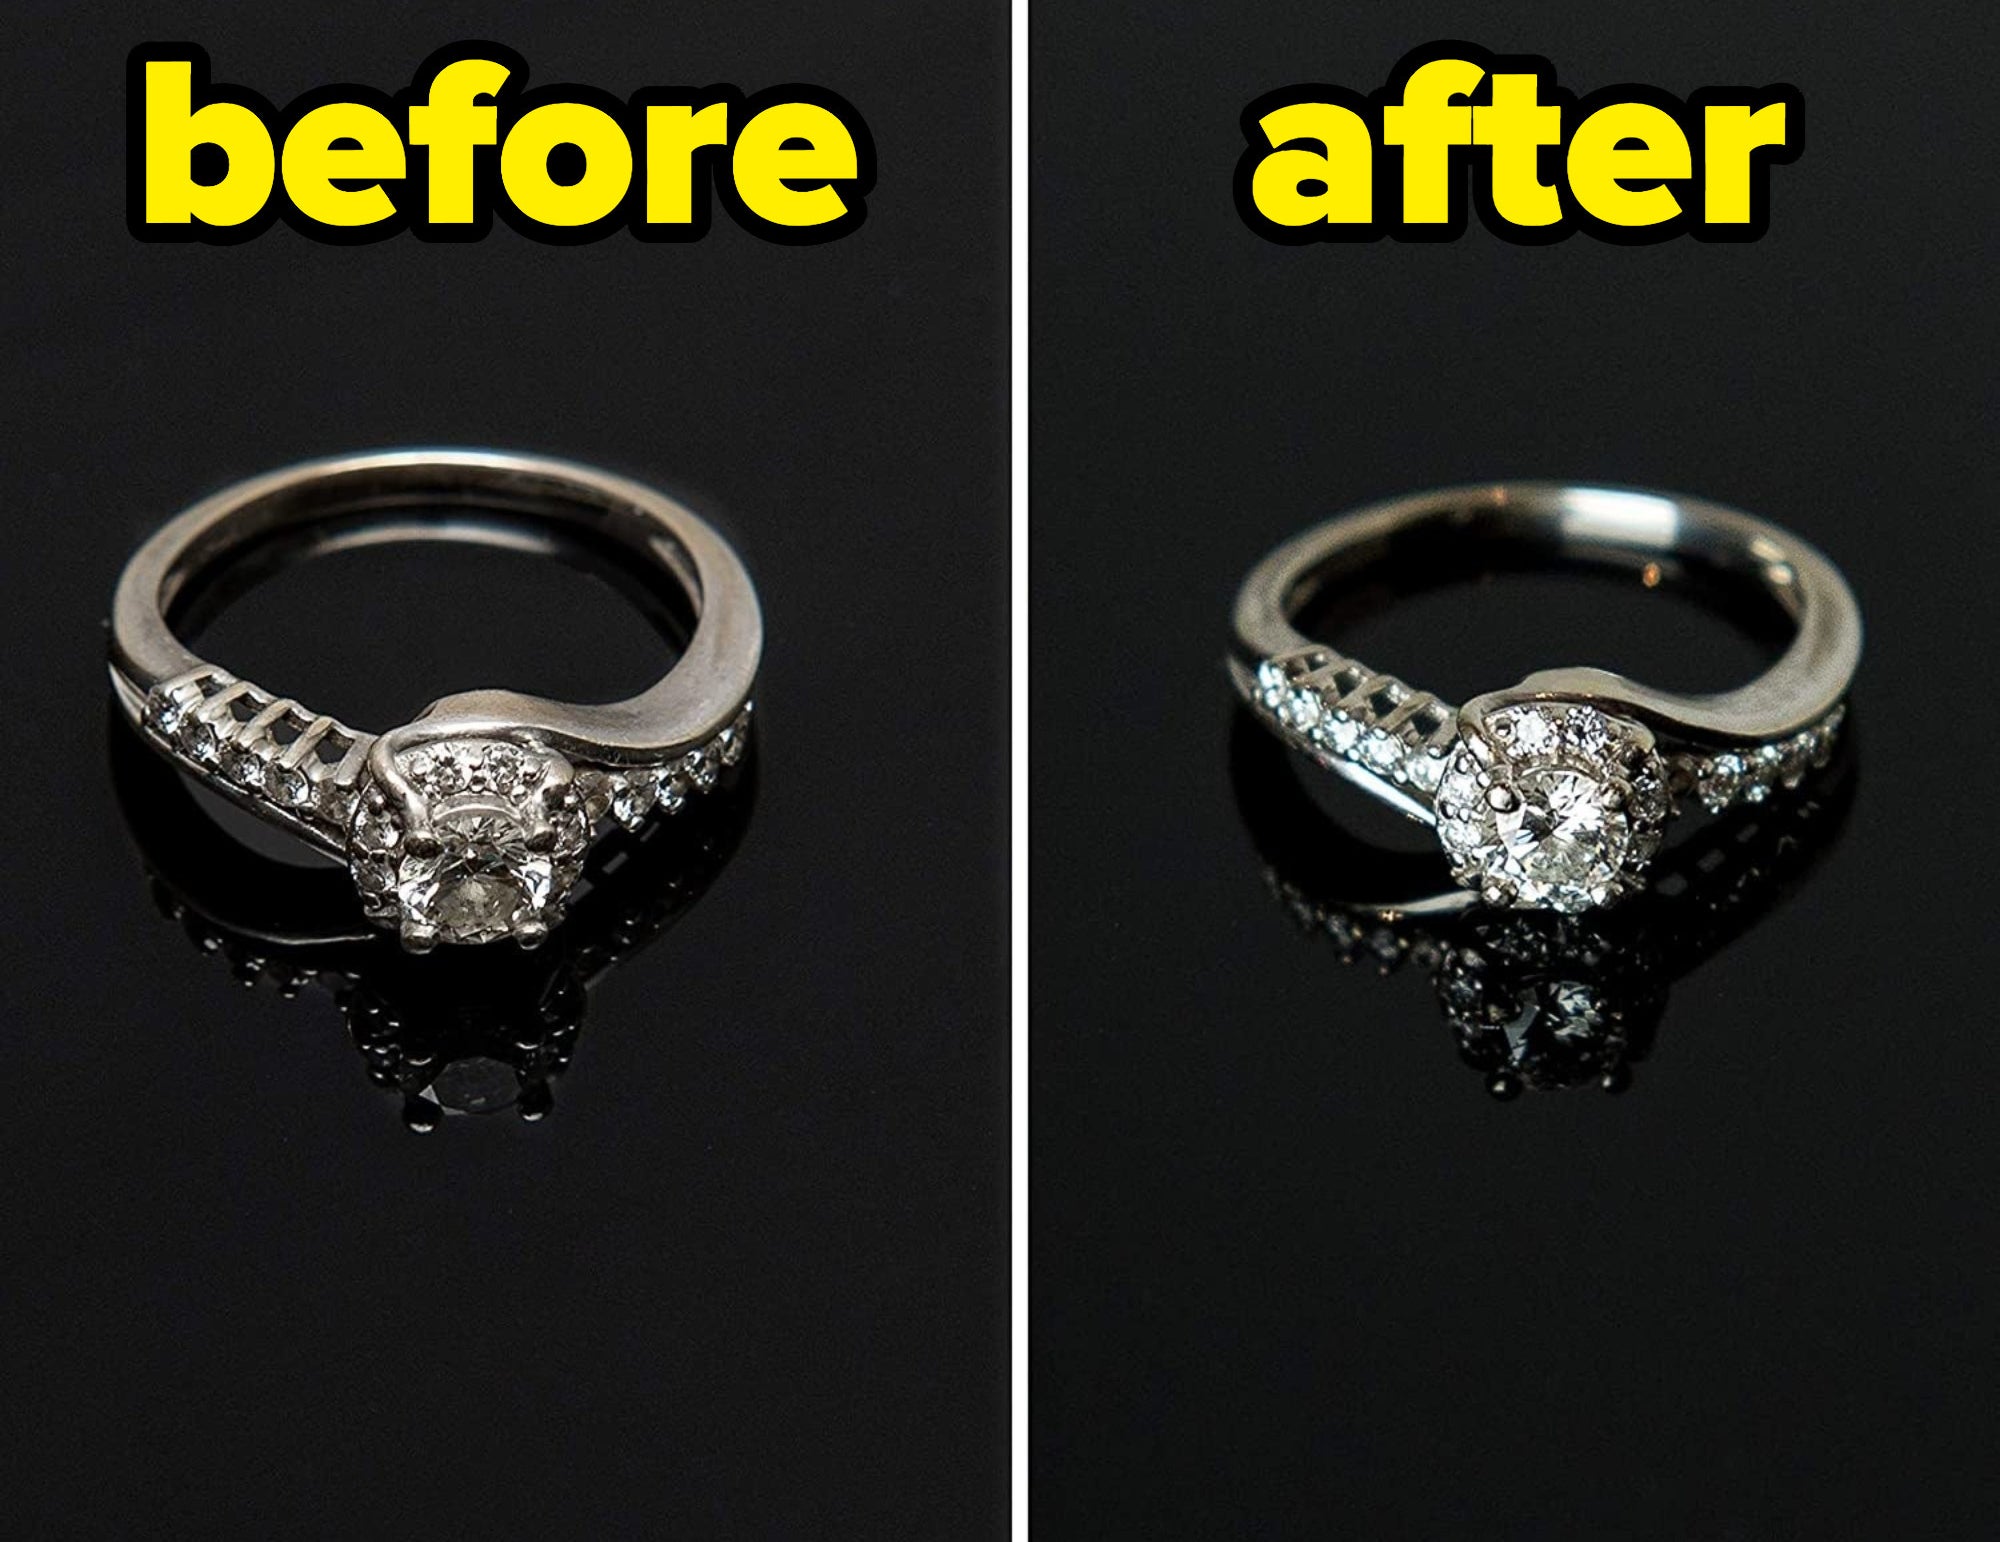 A ring before and after being cleaned with the ultrasonic jewellery cleaner